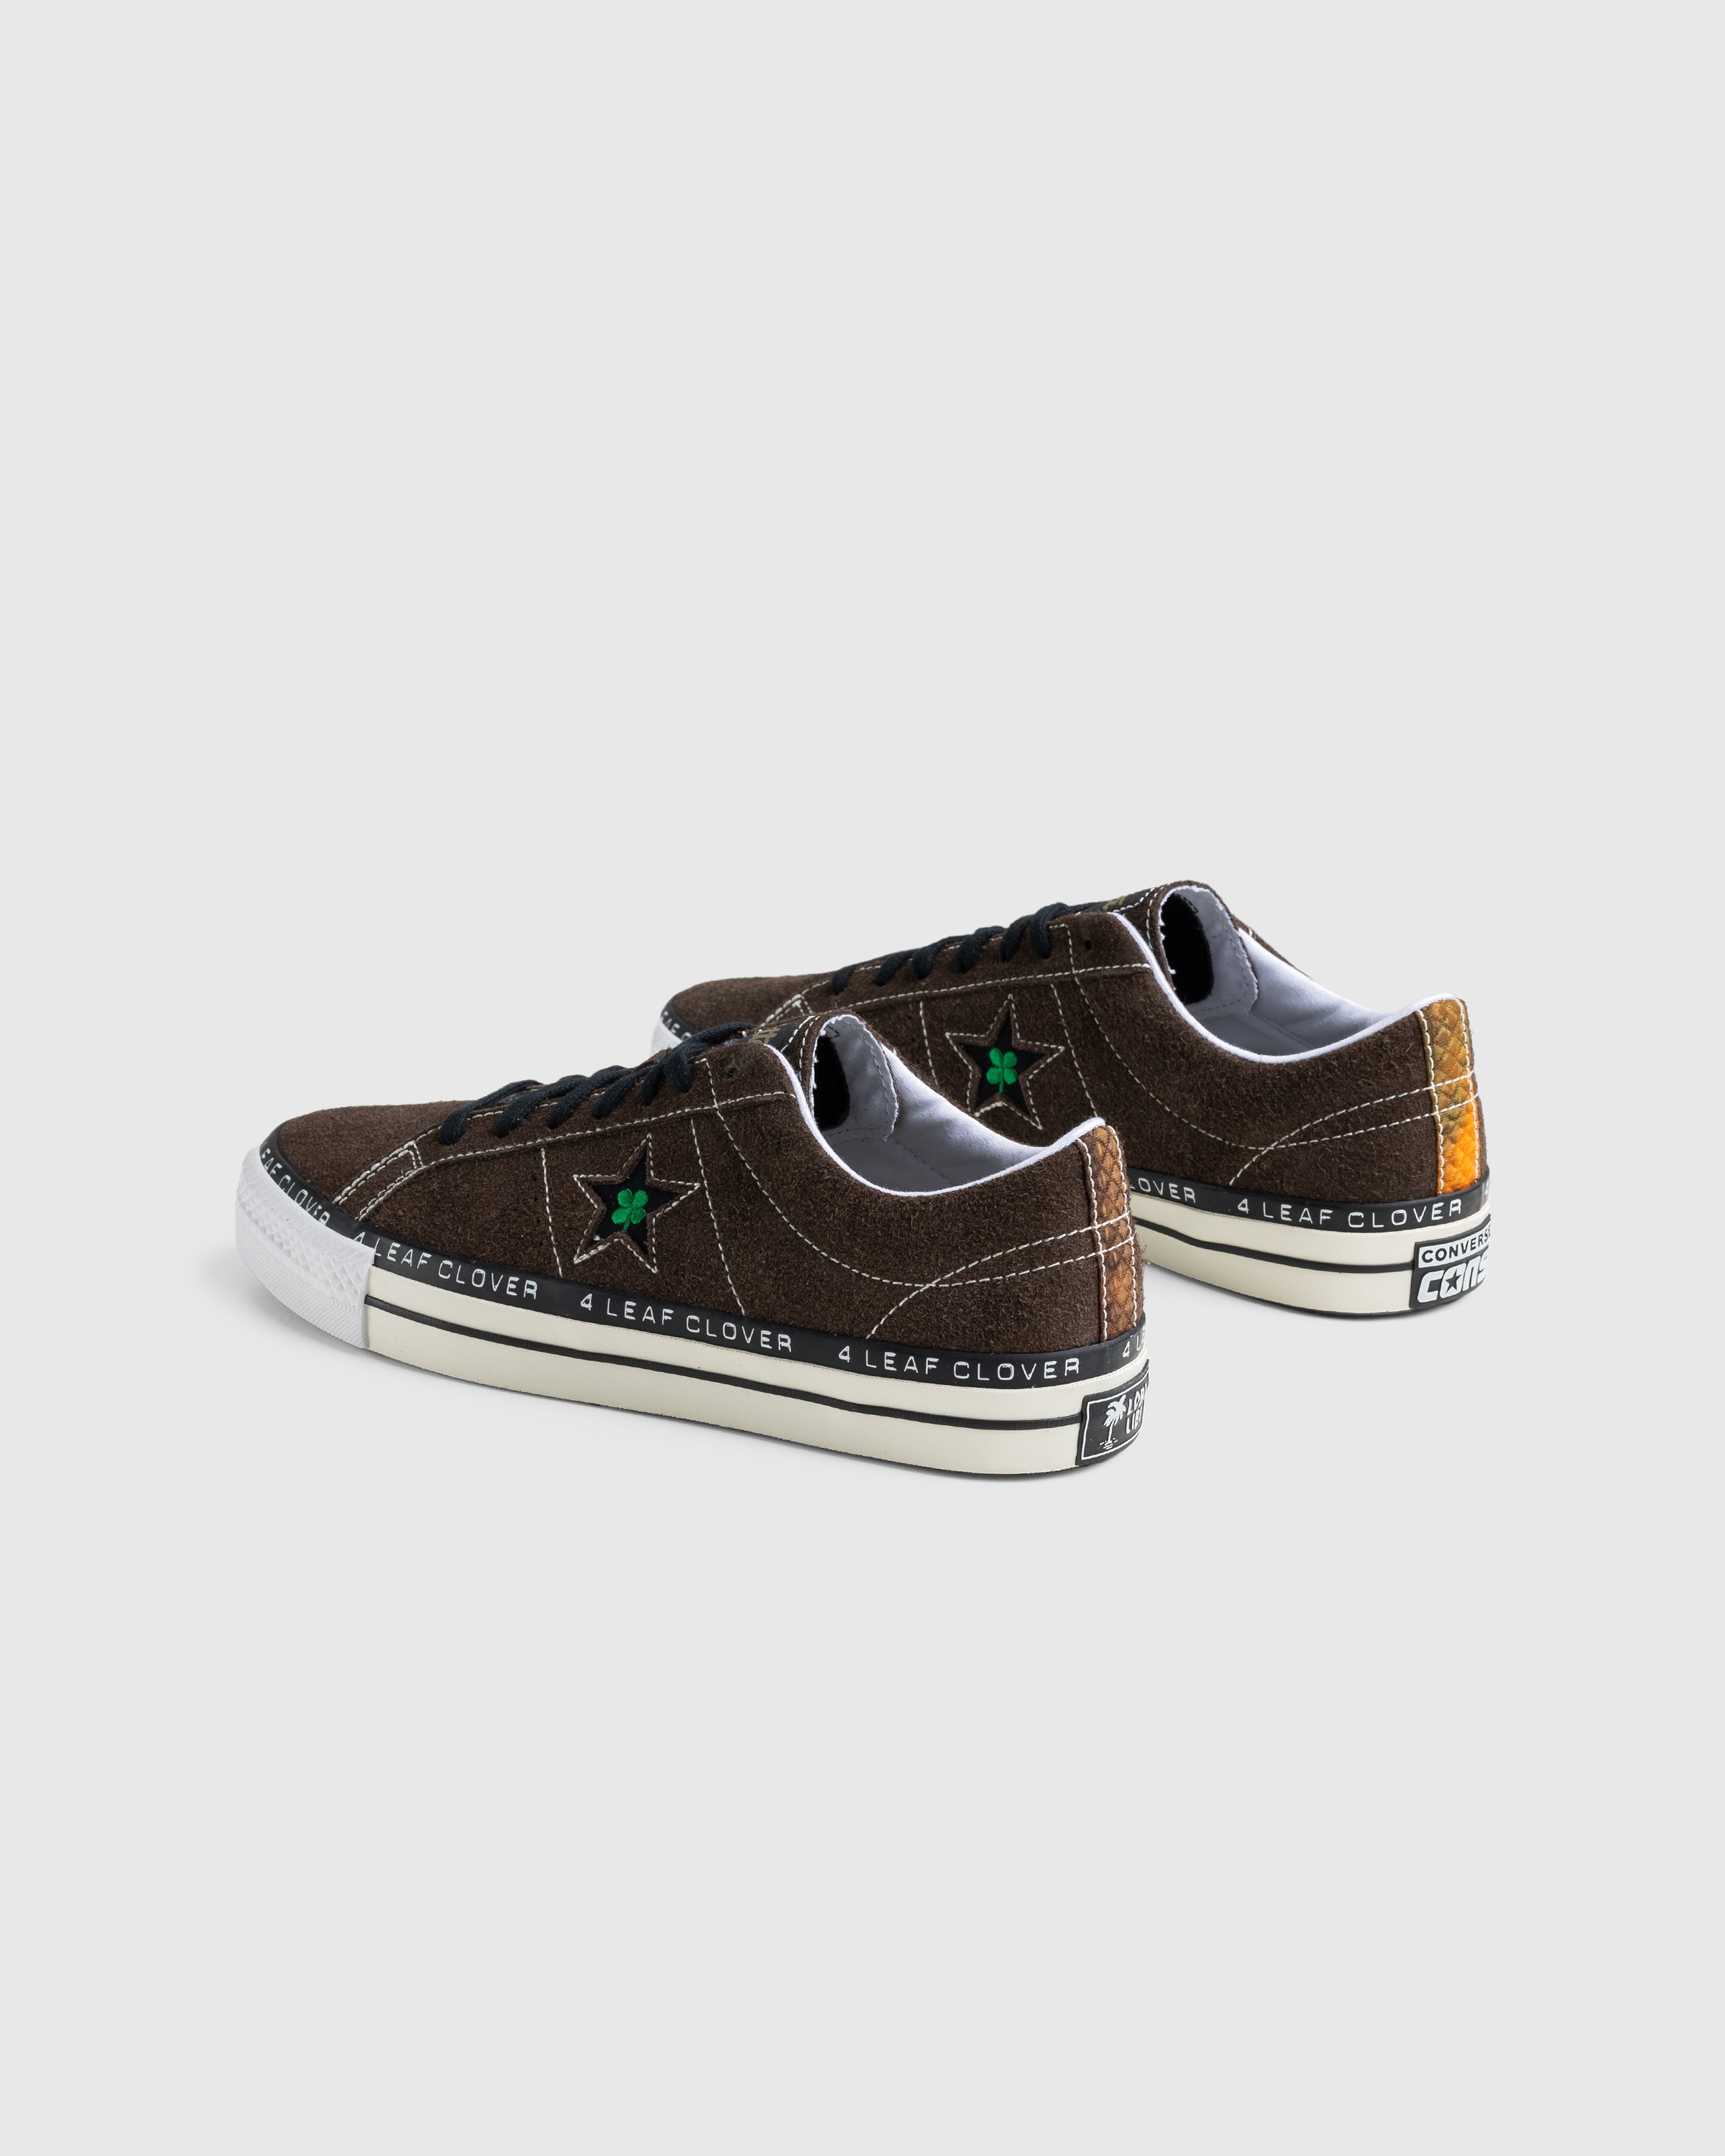 Patta x Converse - “Four Leaf Clover” One Star Pro - Footwear - Brown - Image 4